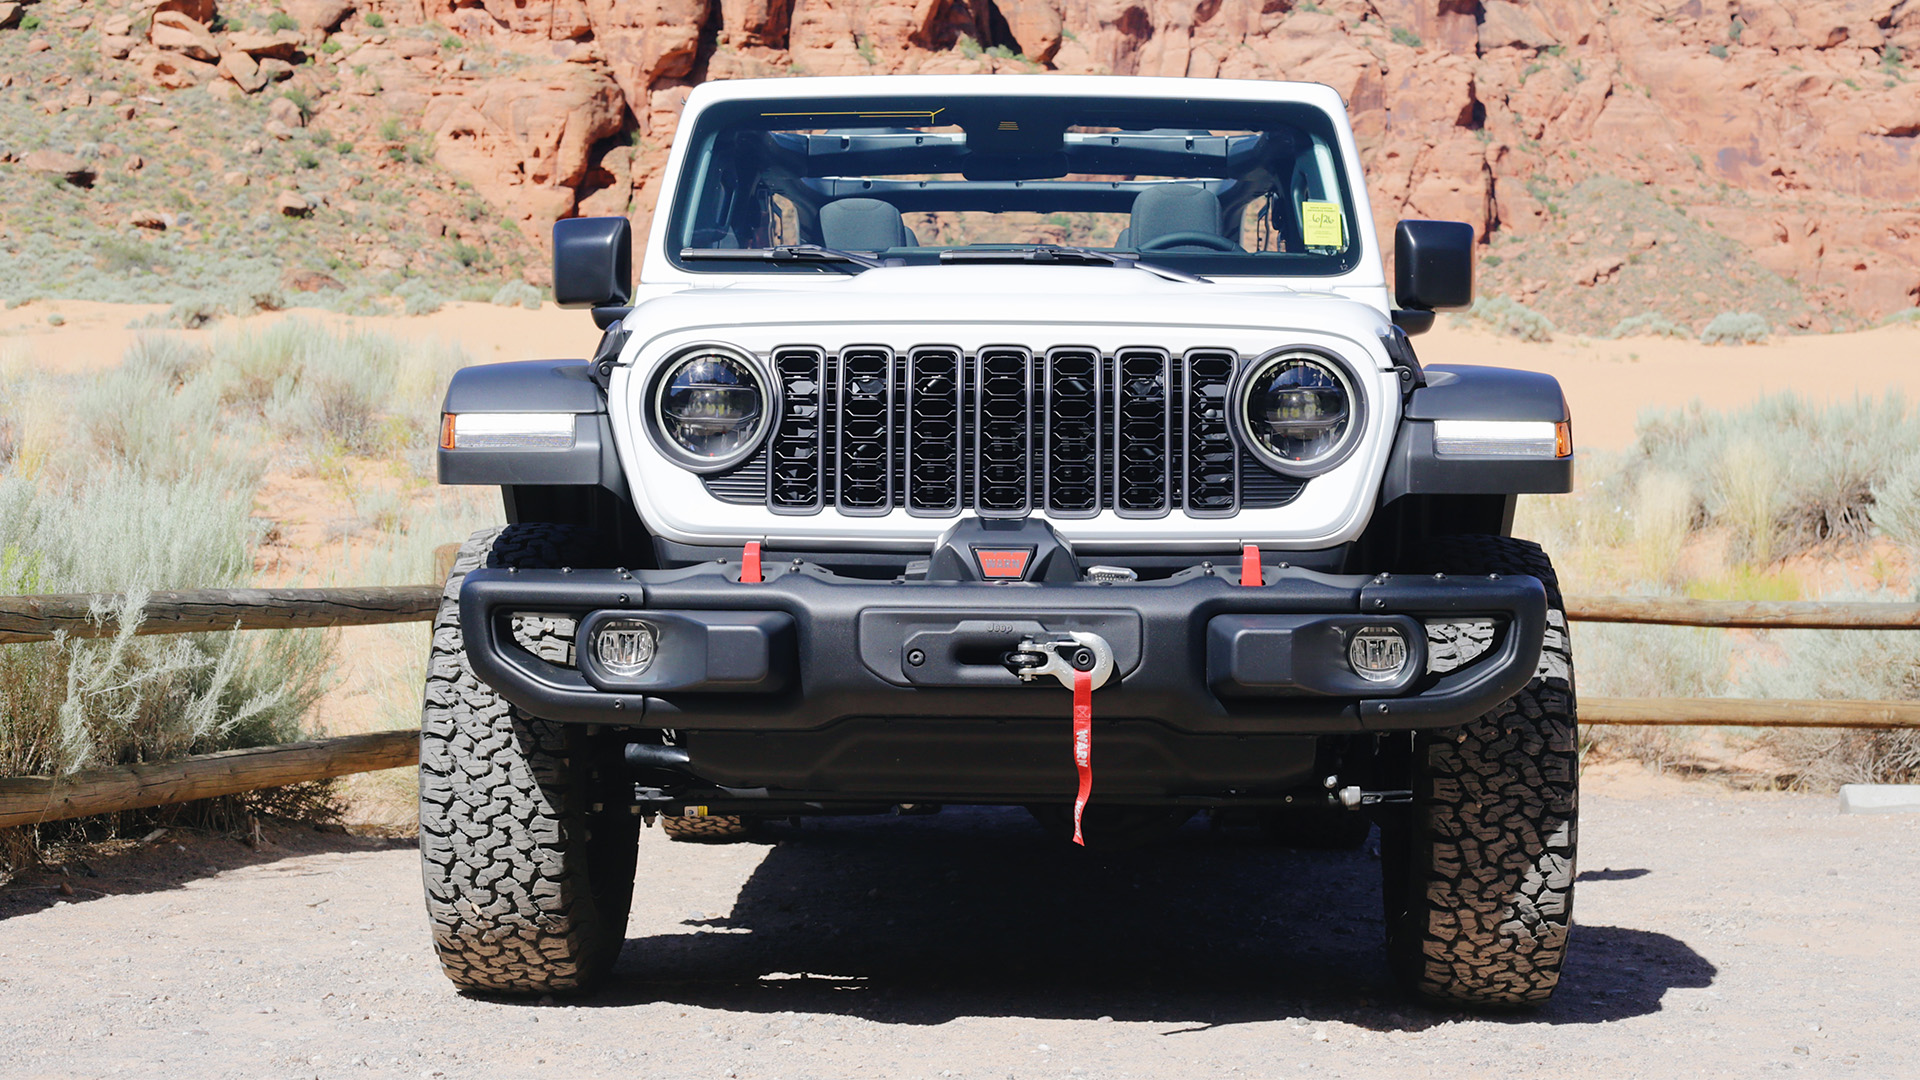 2021 Jeep Wrangler 4xe Review: Modernizing Tradition